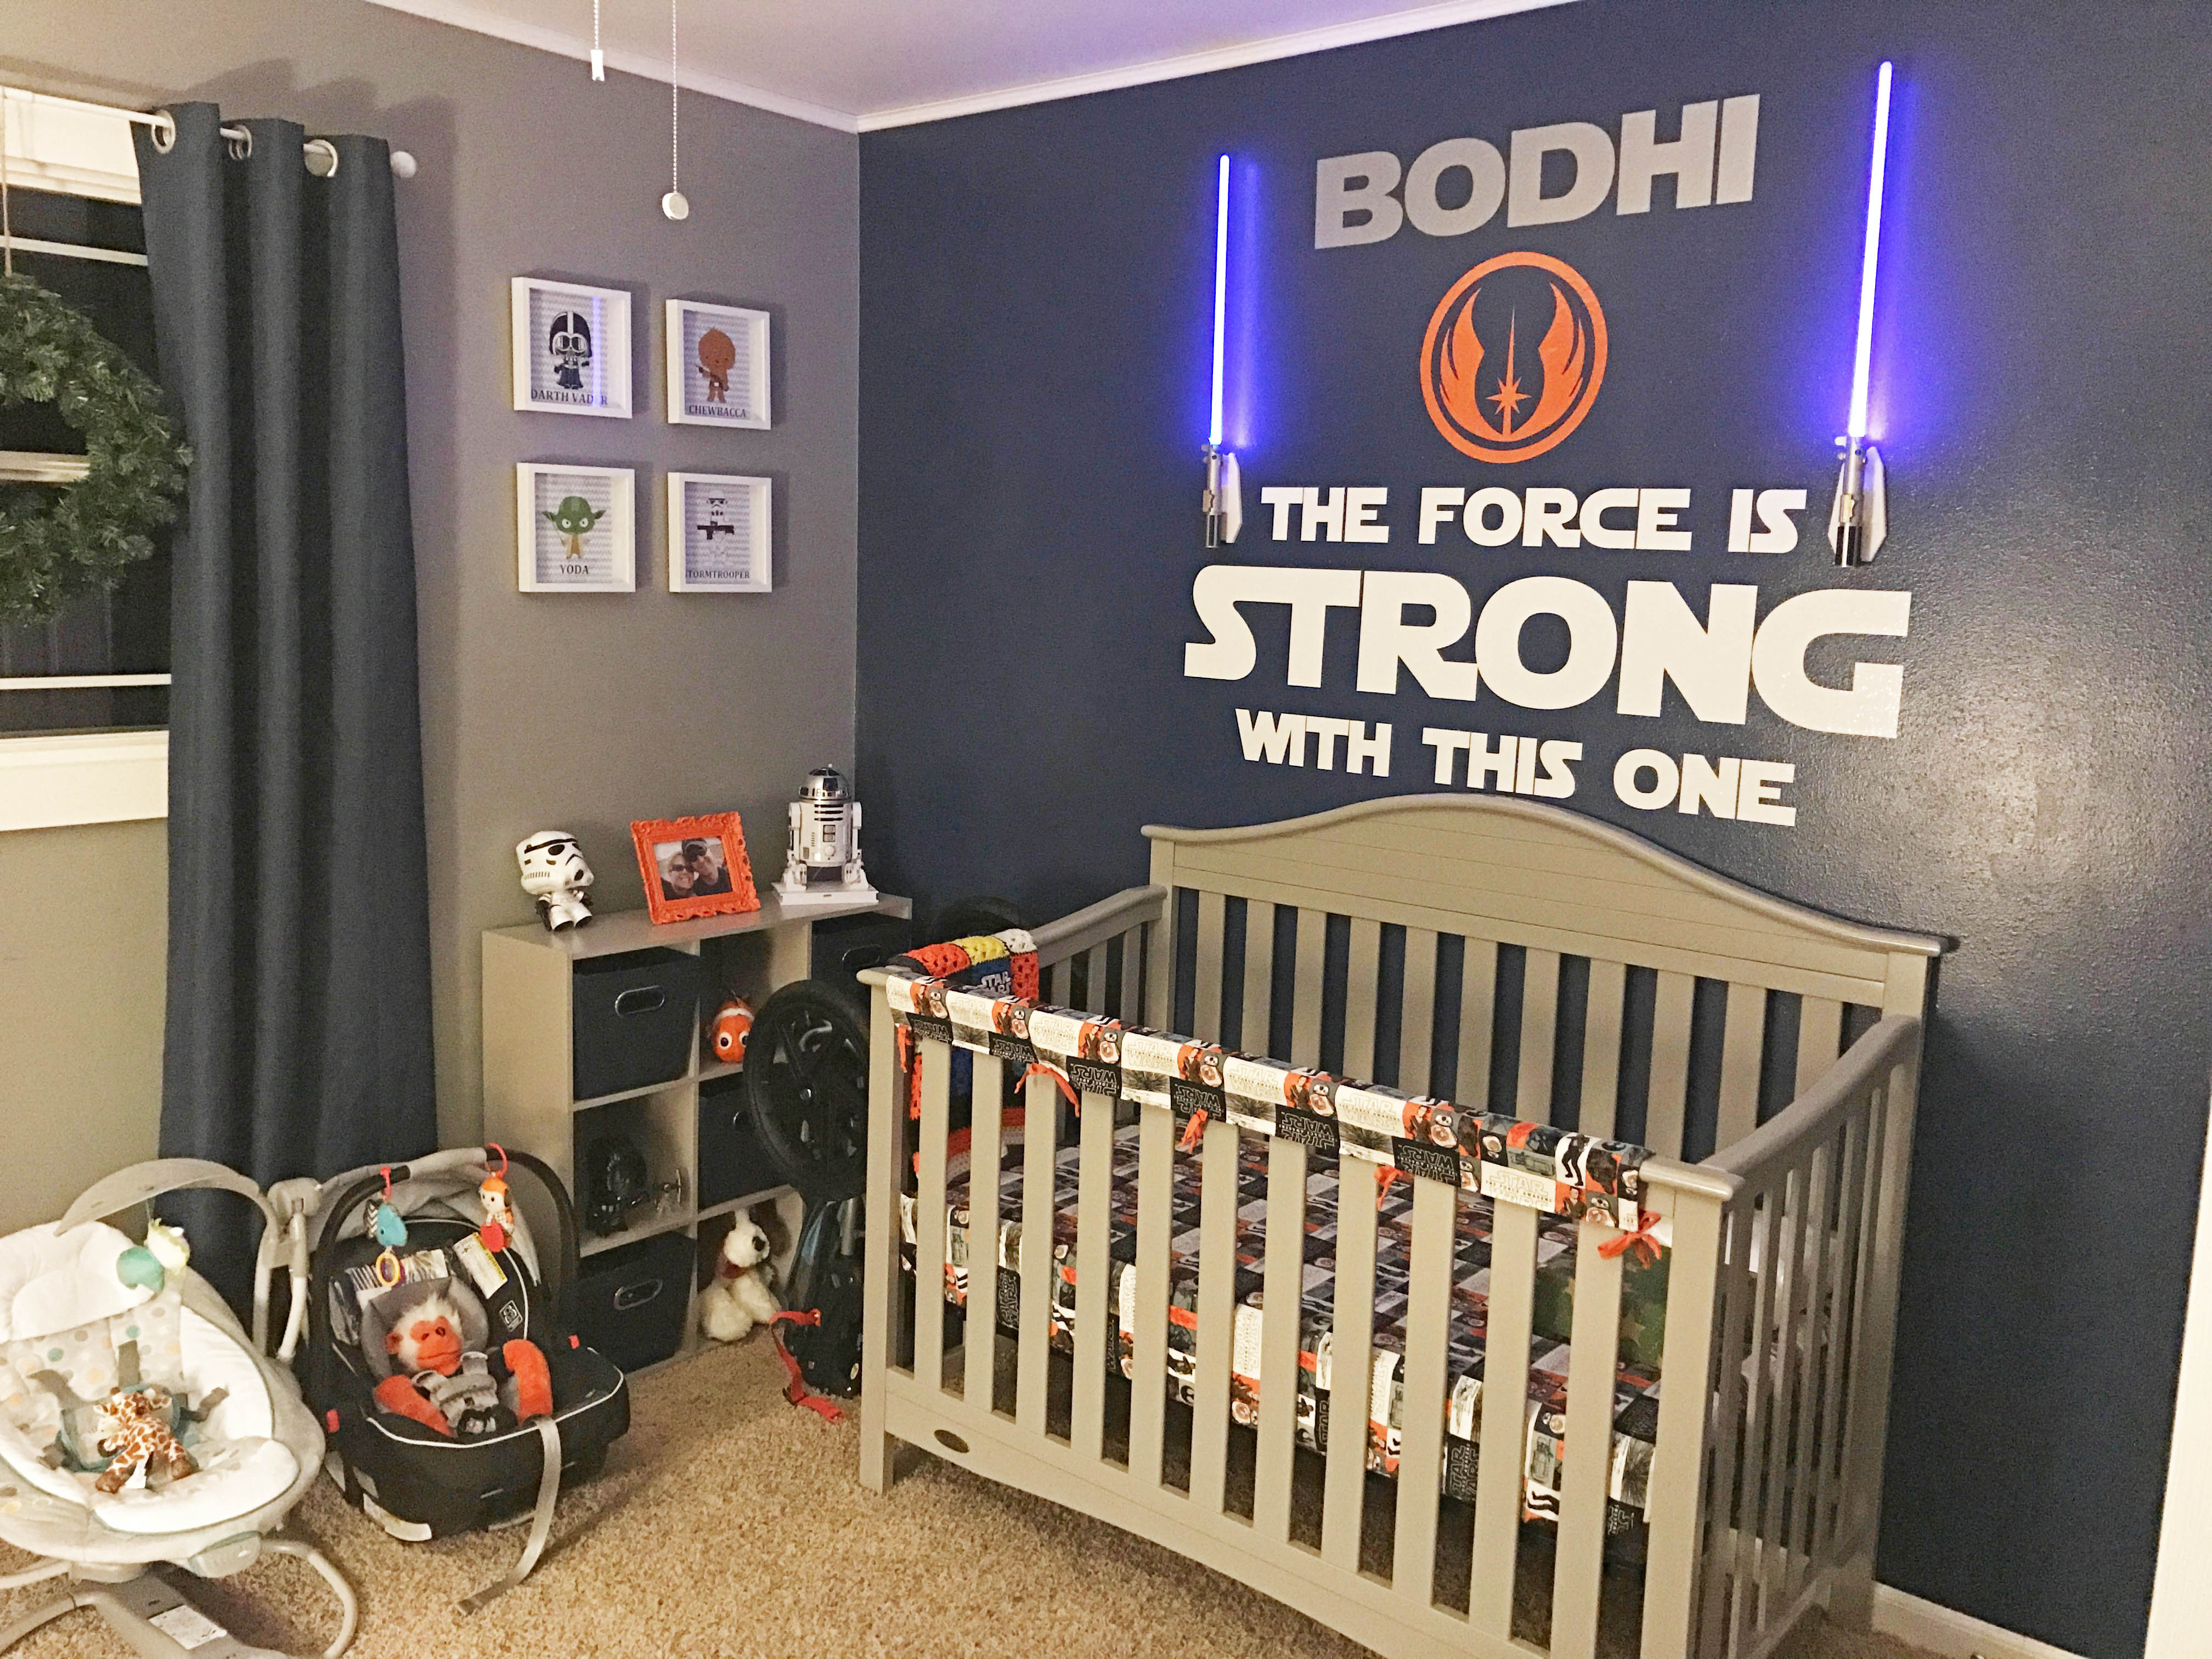 Getting your toddler set up with a nice Star Wars bedroom is the best way to make an impression.